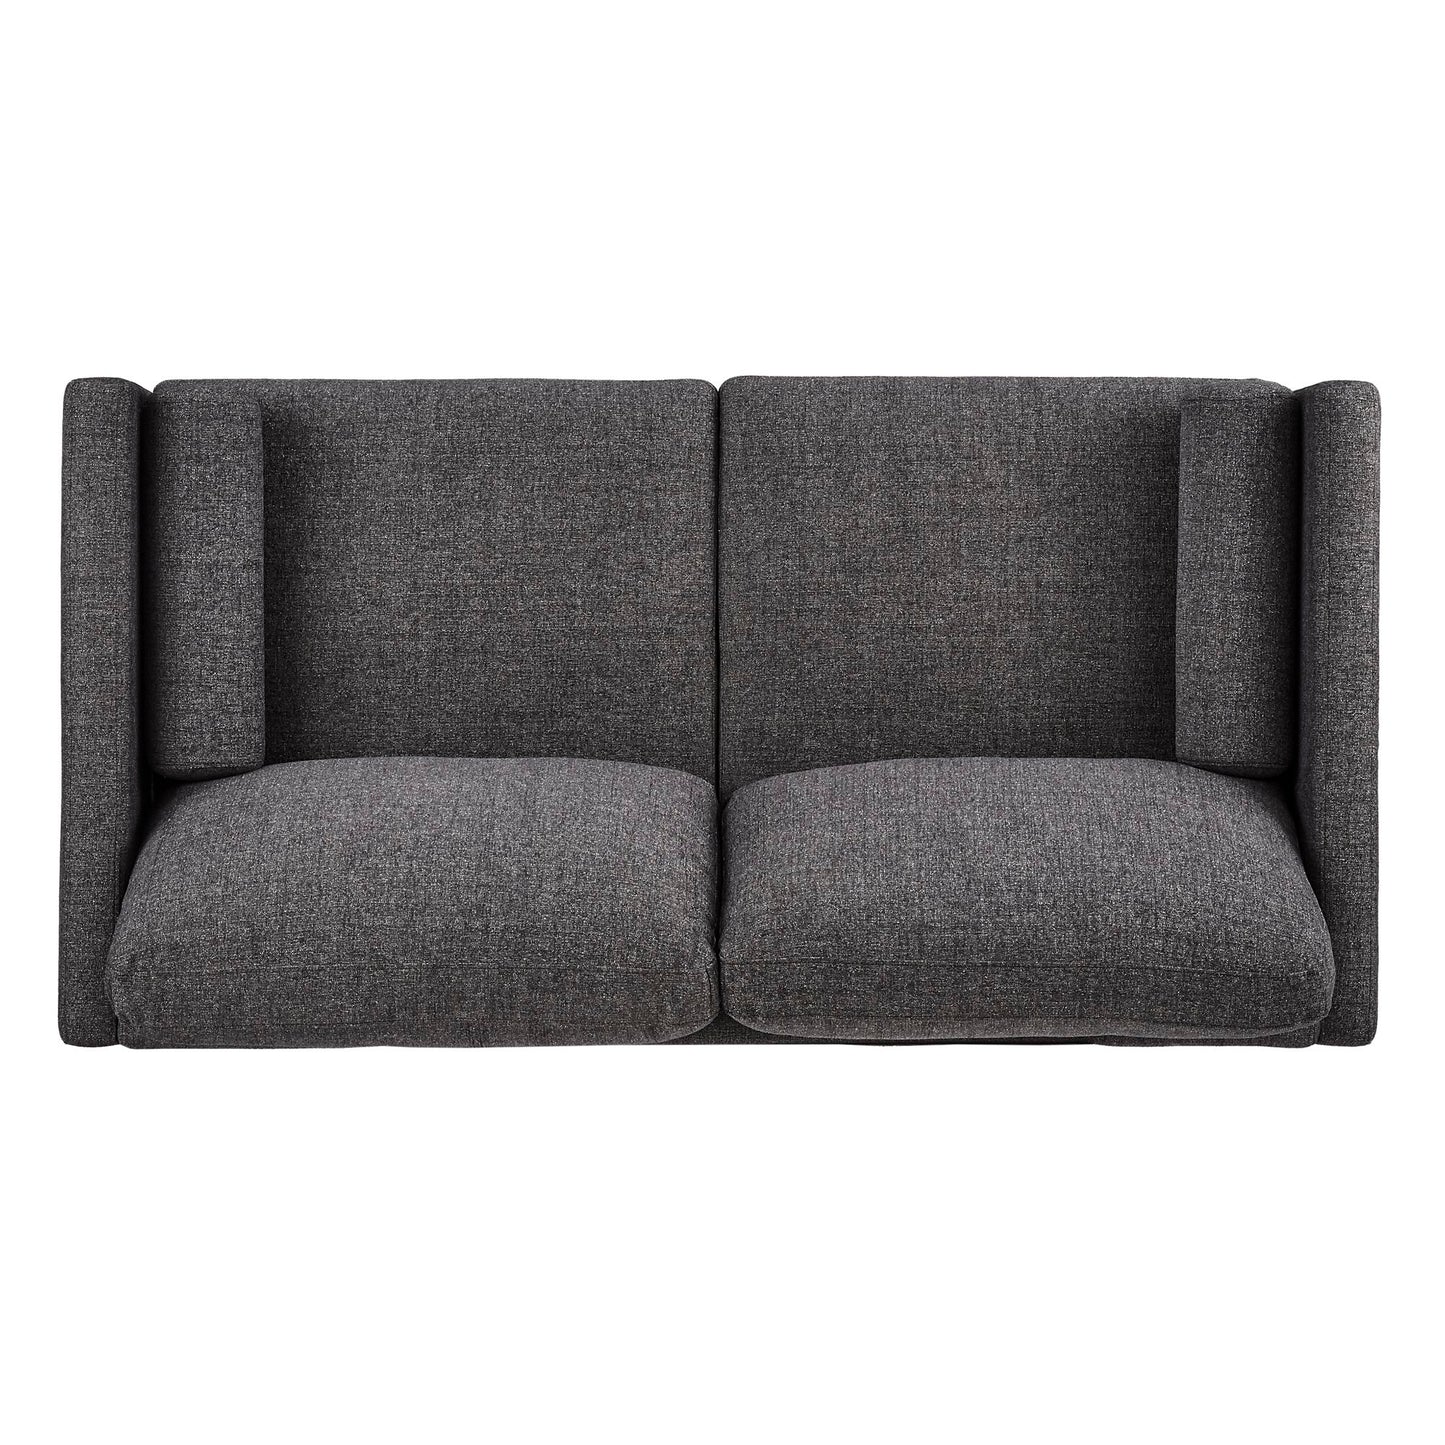 Mid-Century Tapered Leg Loveseat with Pillows - Black